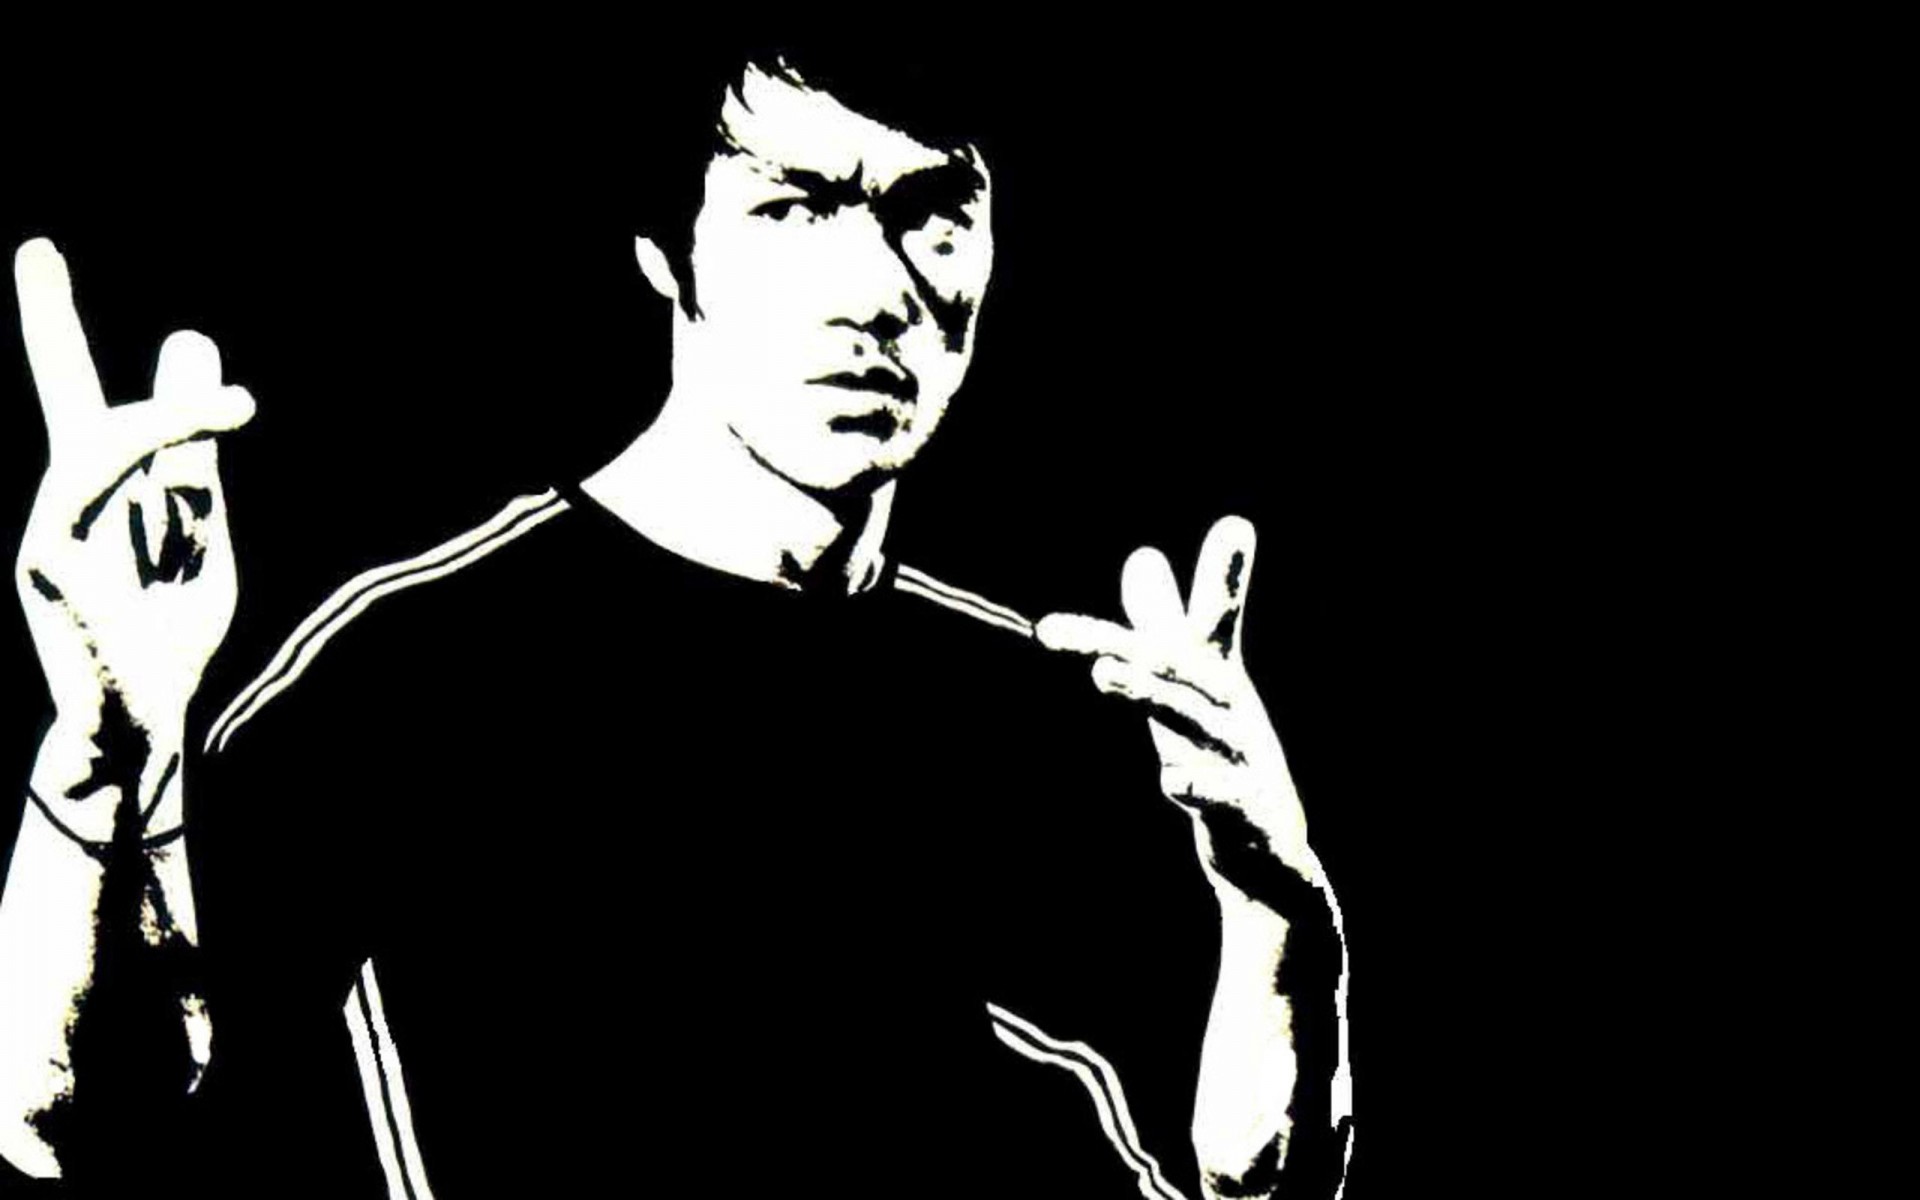 Bruce Lee Quotes About God - HD Wallpaper 